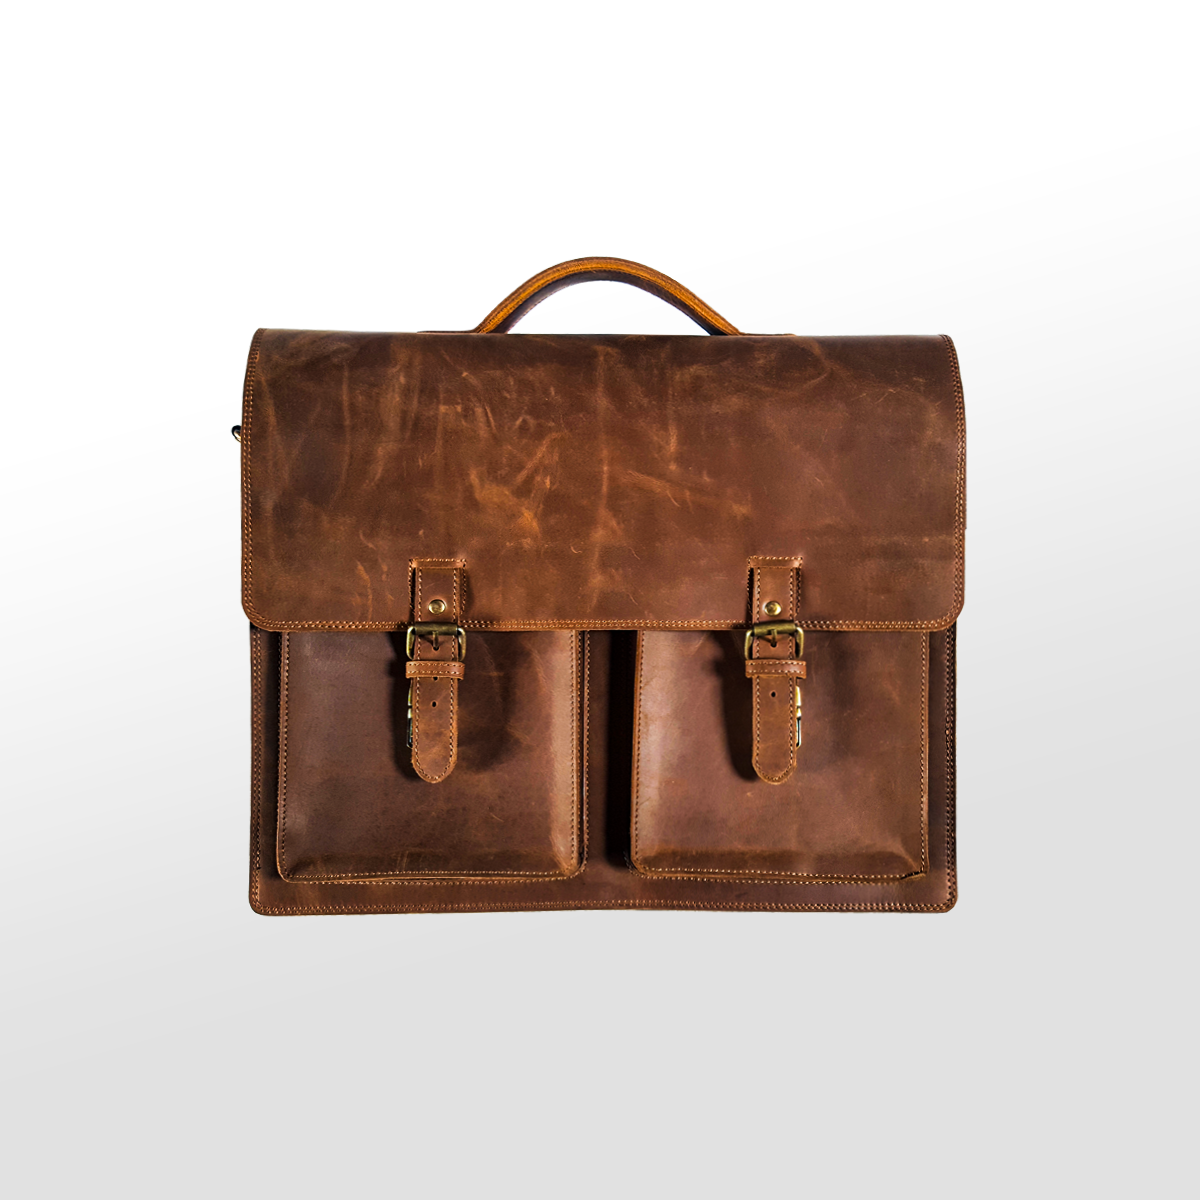 Harven Leather Shop – Buy Leather Products Online On Our Store